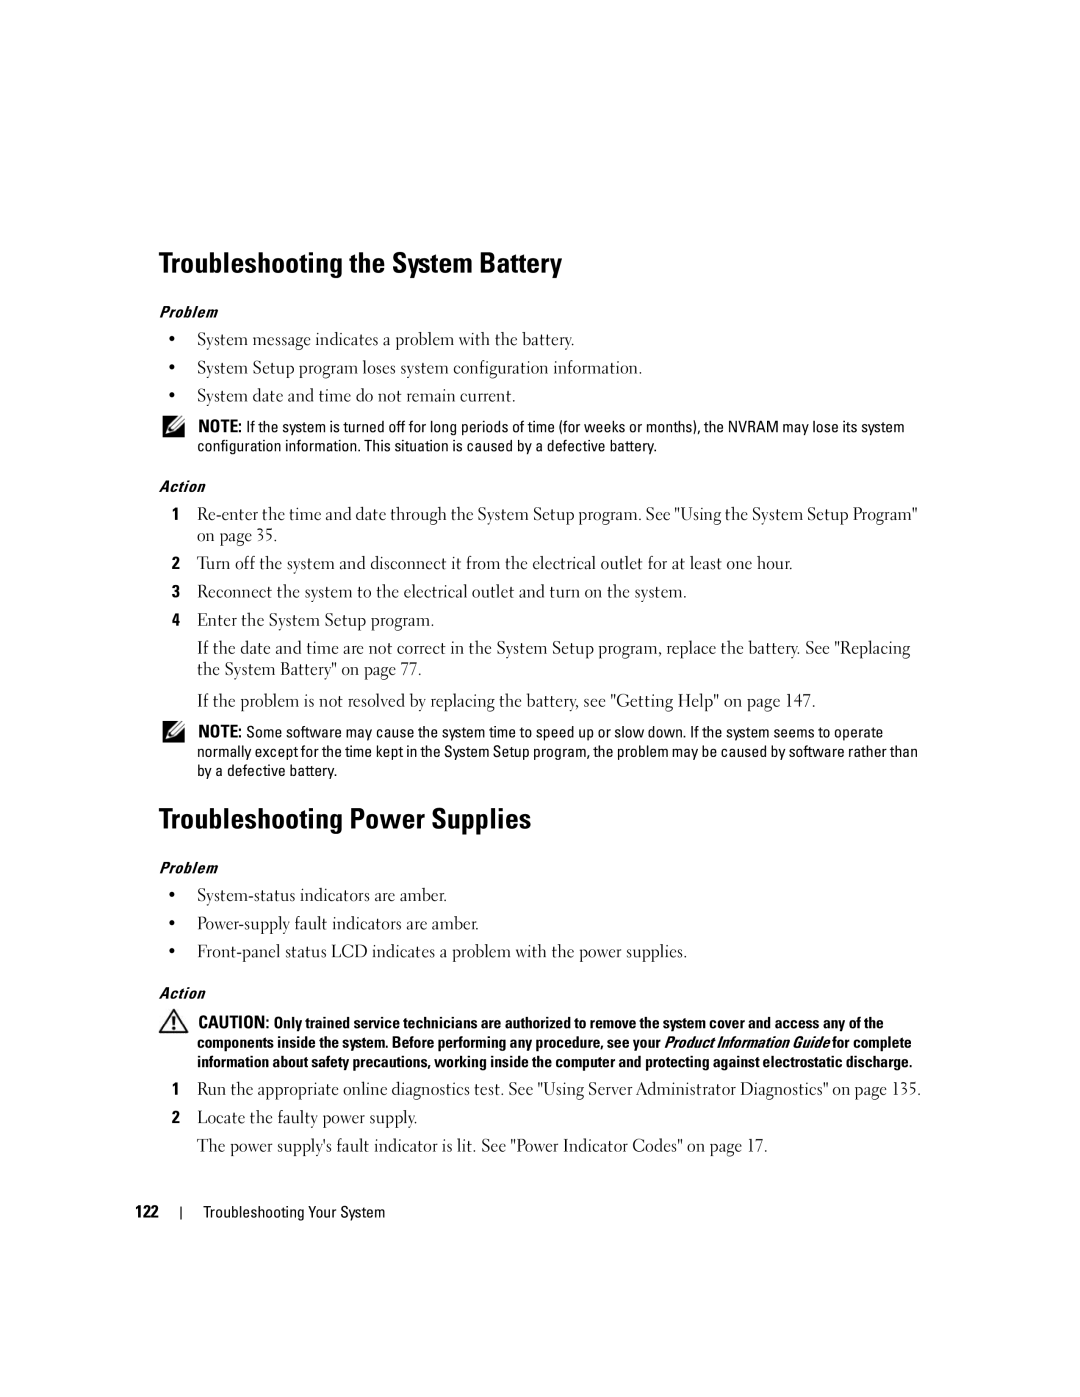 Dell 2900 owner manual Troubleshooting the System Battery, Troubleshooting Power Supplies 